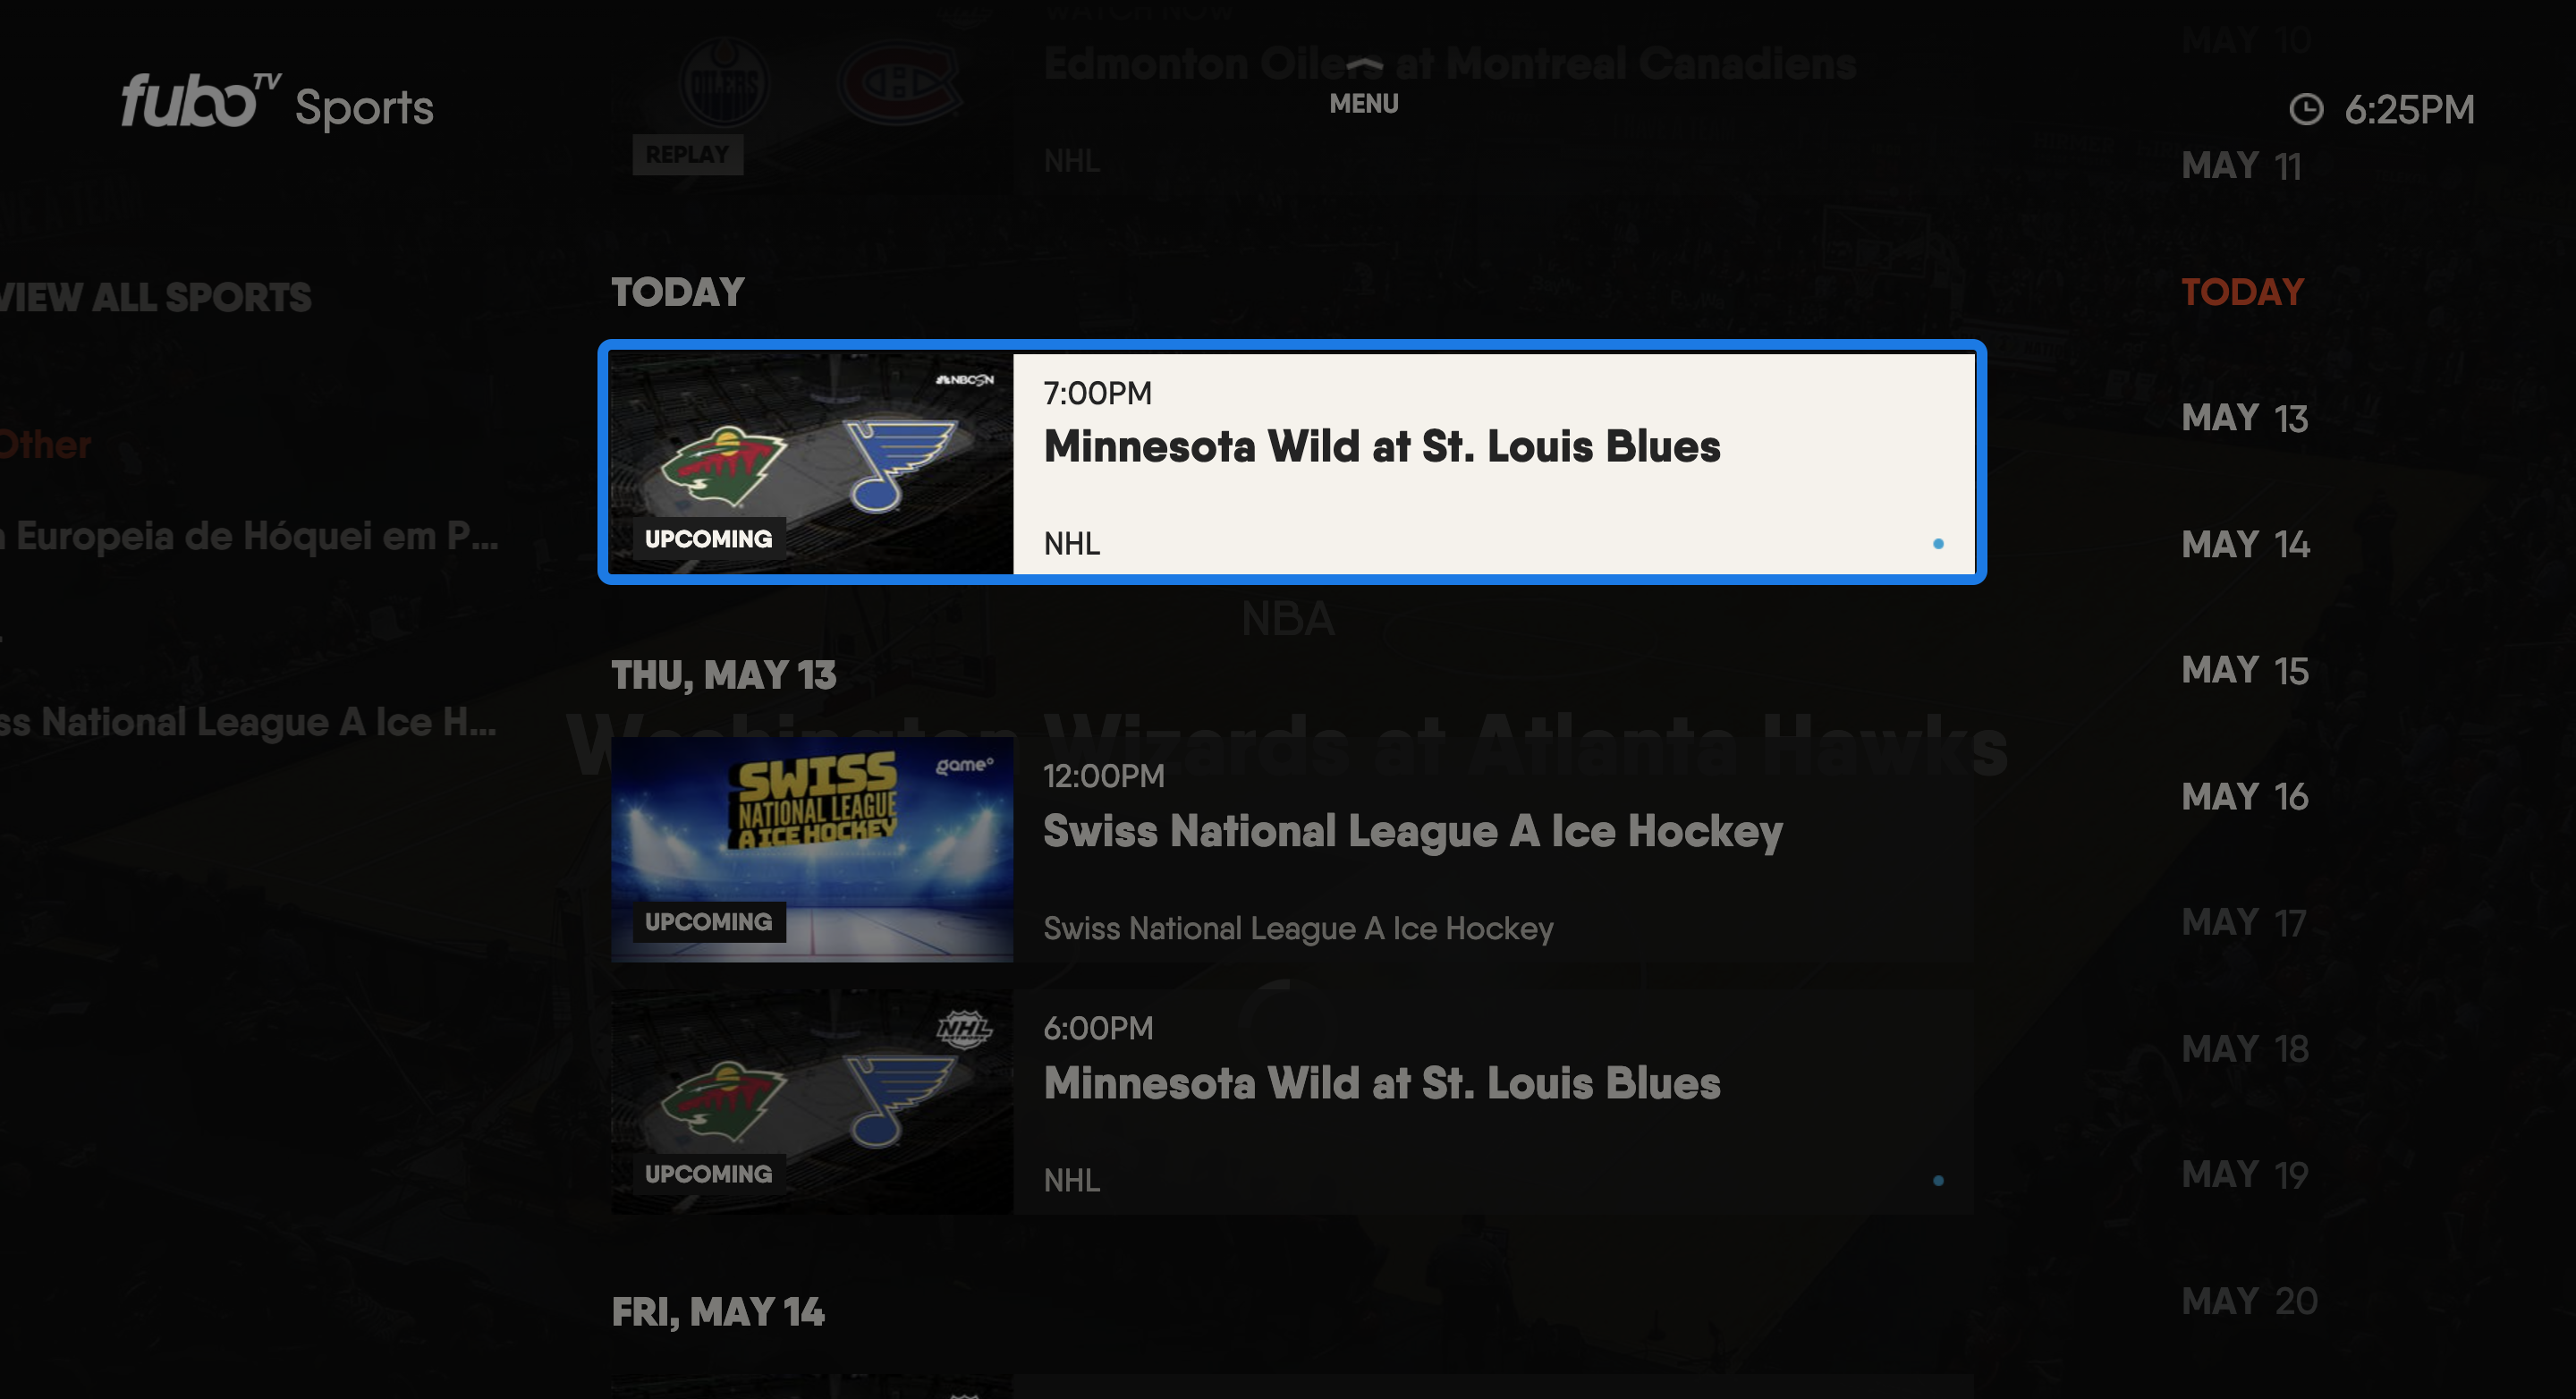 SPORTS screen of the FuboTV app on a Smart TV with an upcoming hockey game highlighted